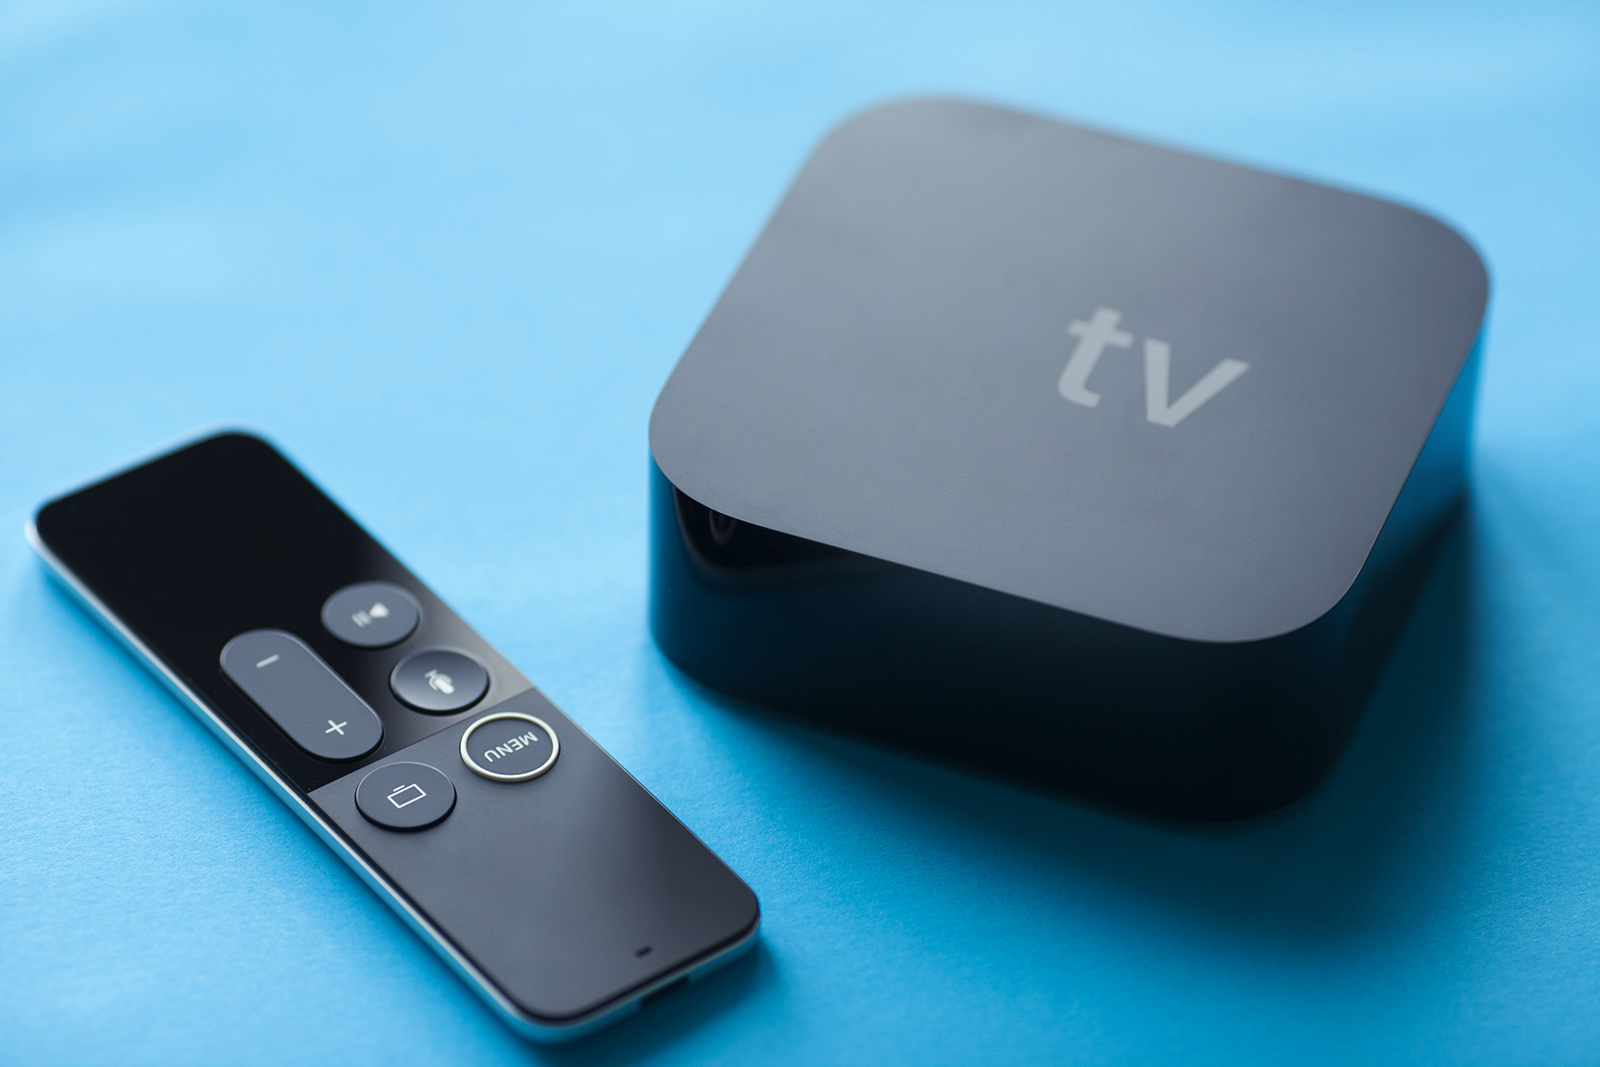 iOS 16 breaks AirPlay support for older Apple TV models